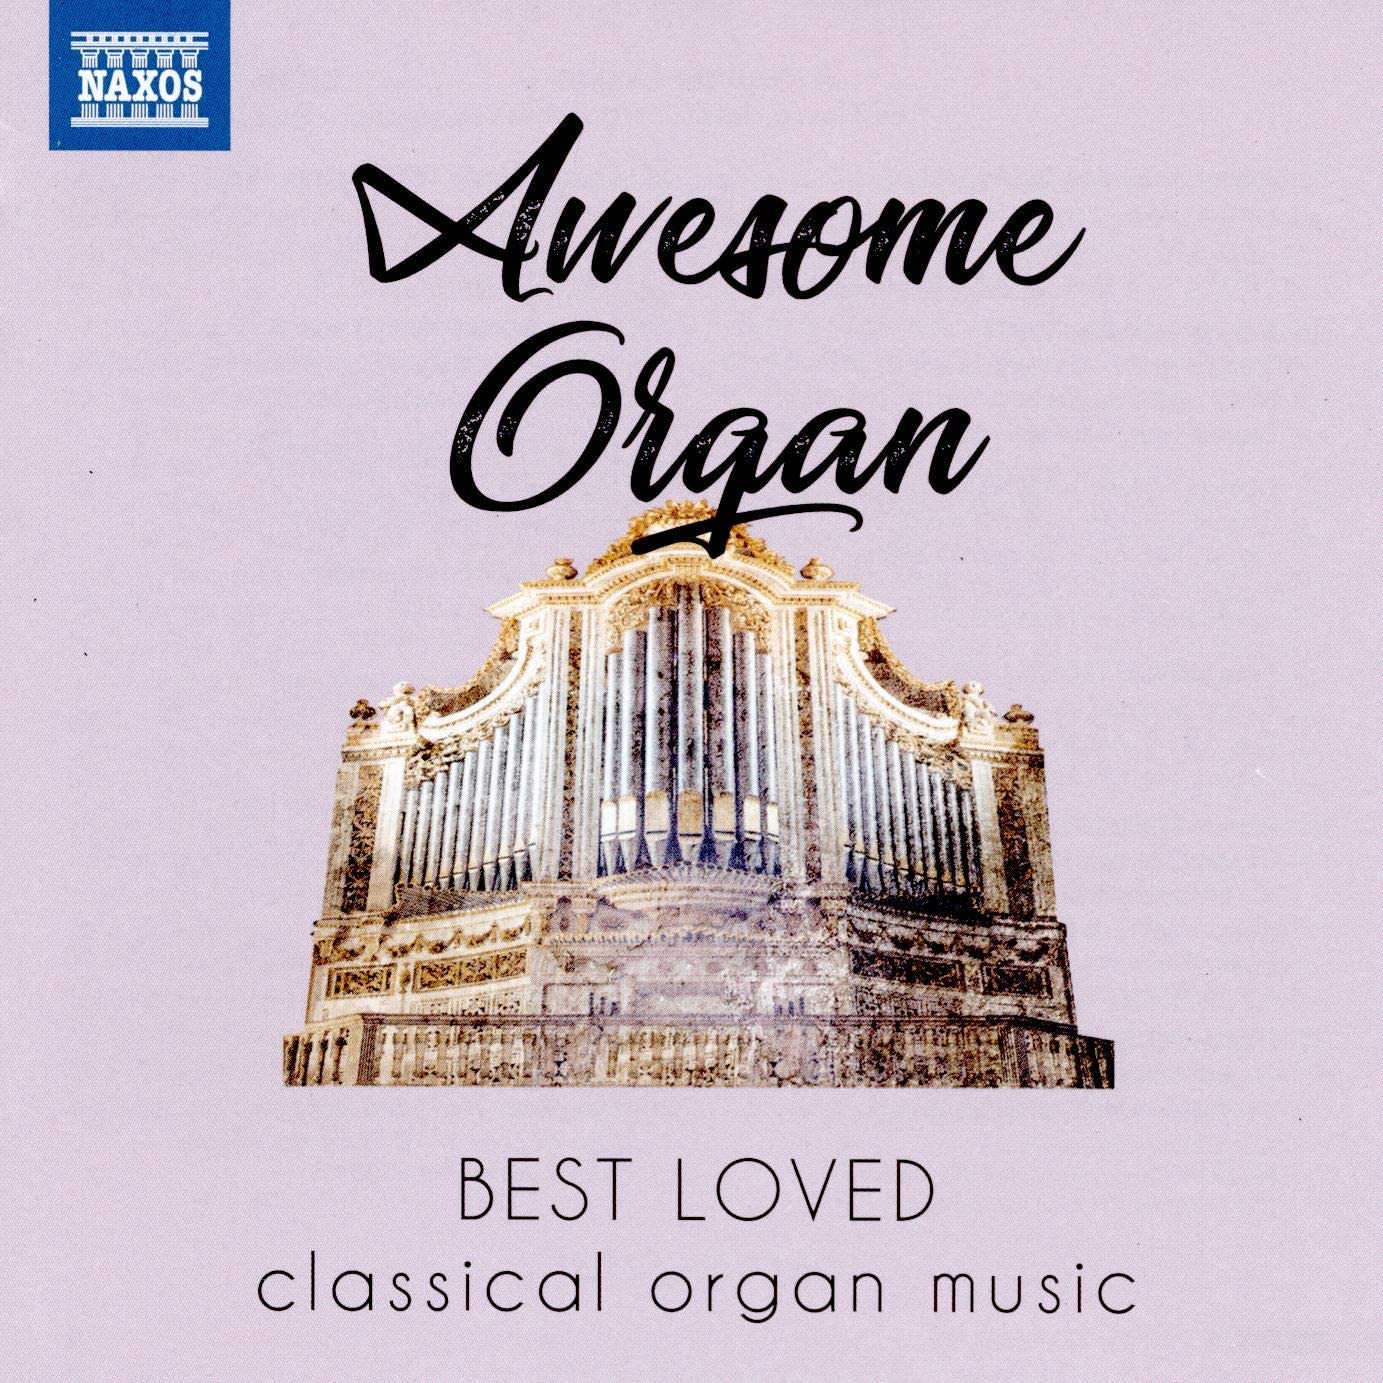 Cover of Awesome Organ CD